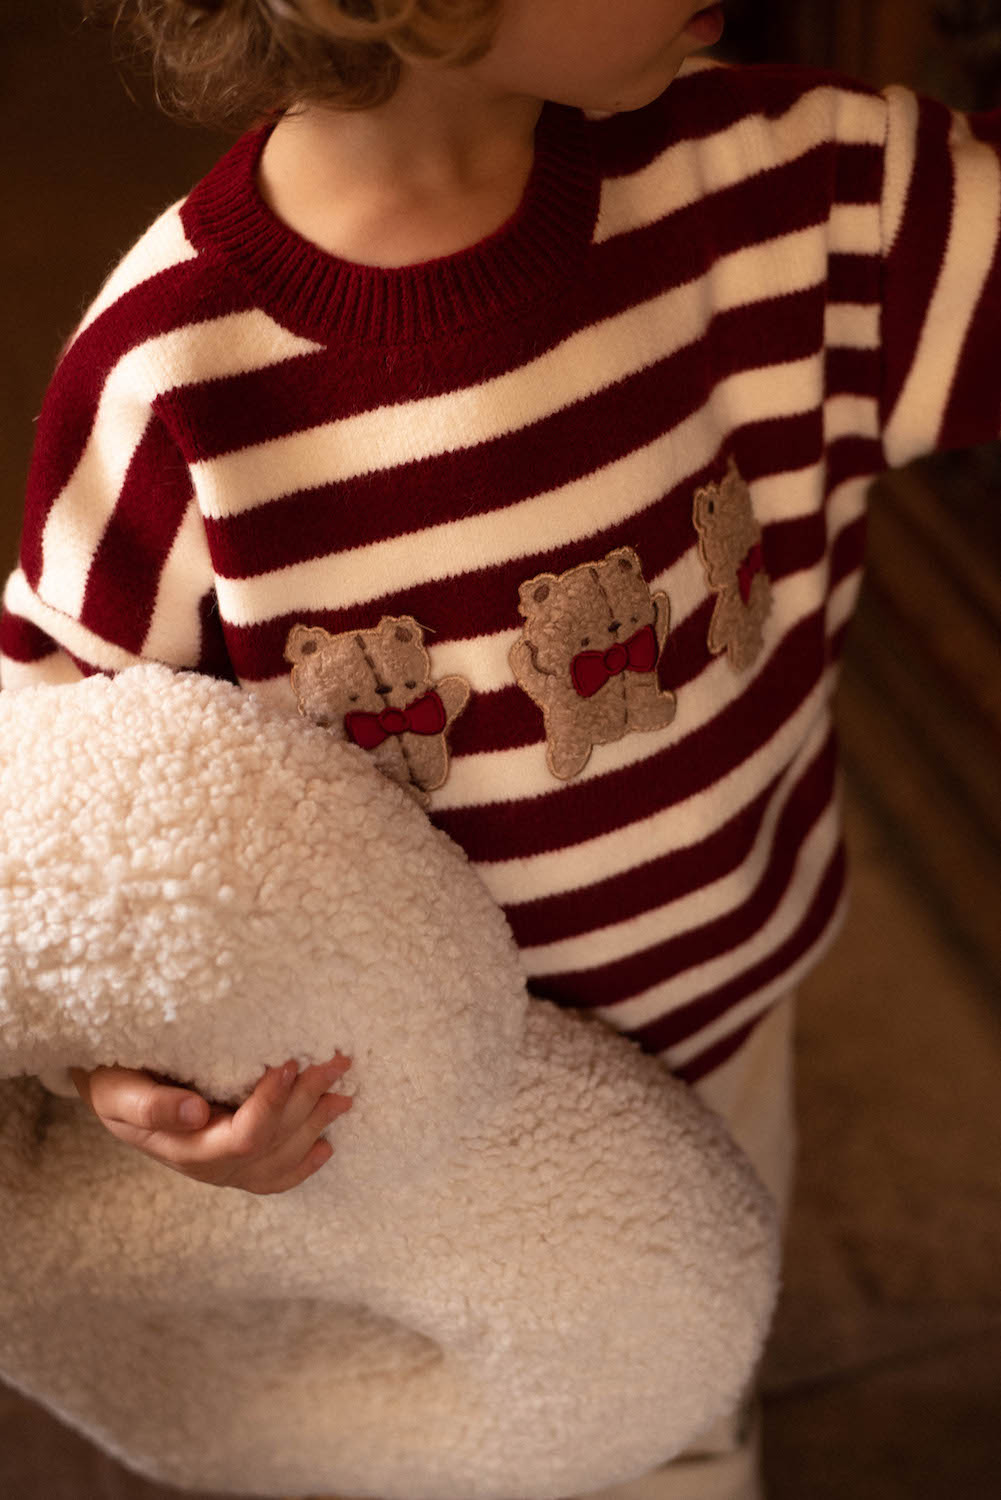 Boucle Letter cushion by Bettys Home Teddy Letter Pillow held by boy in red stripe sweater 